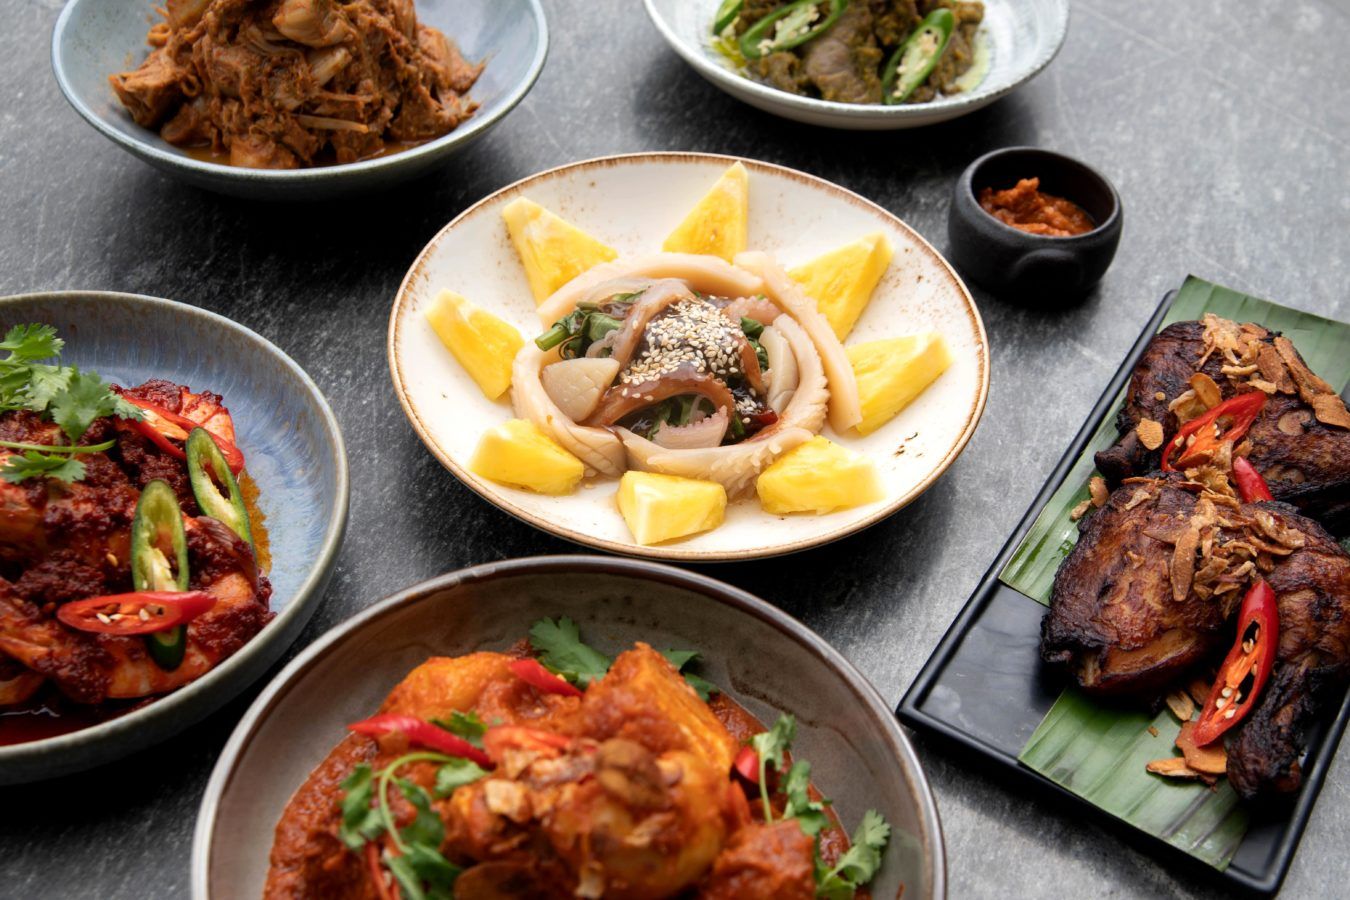 Restaurant Kin’s new menu puts focus on heritage Malay and Indonesian dishes